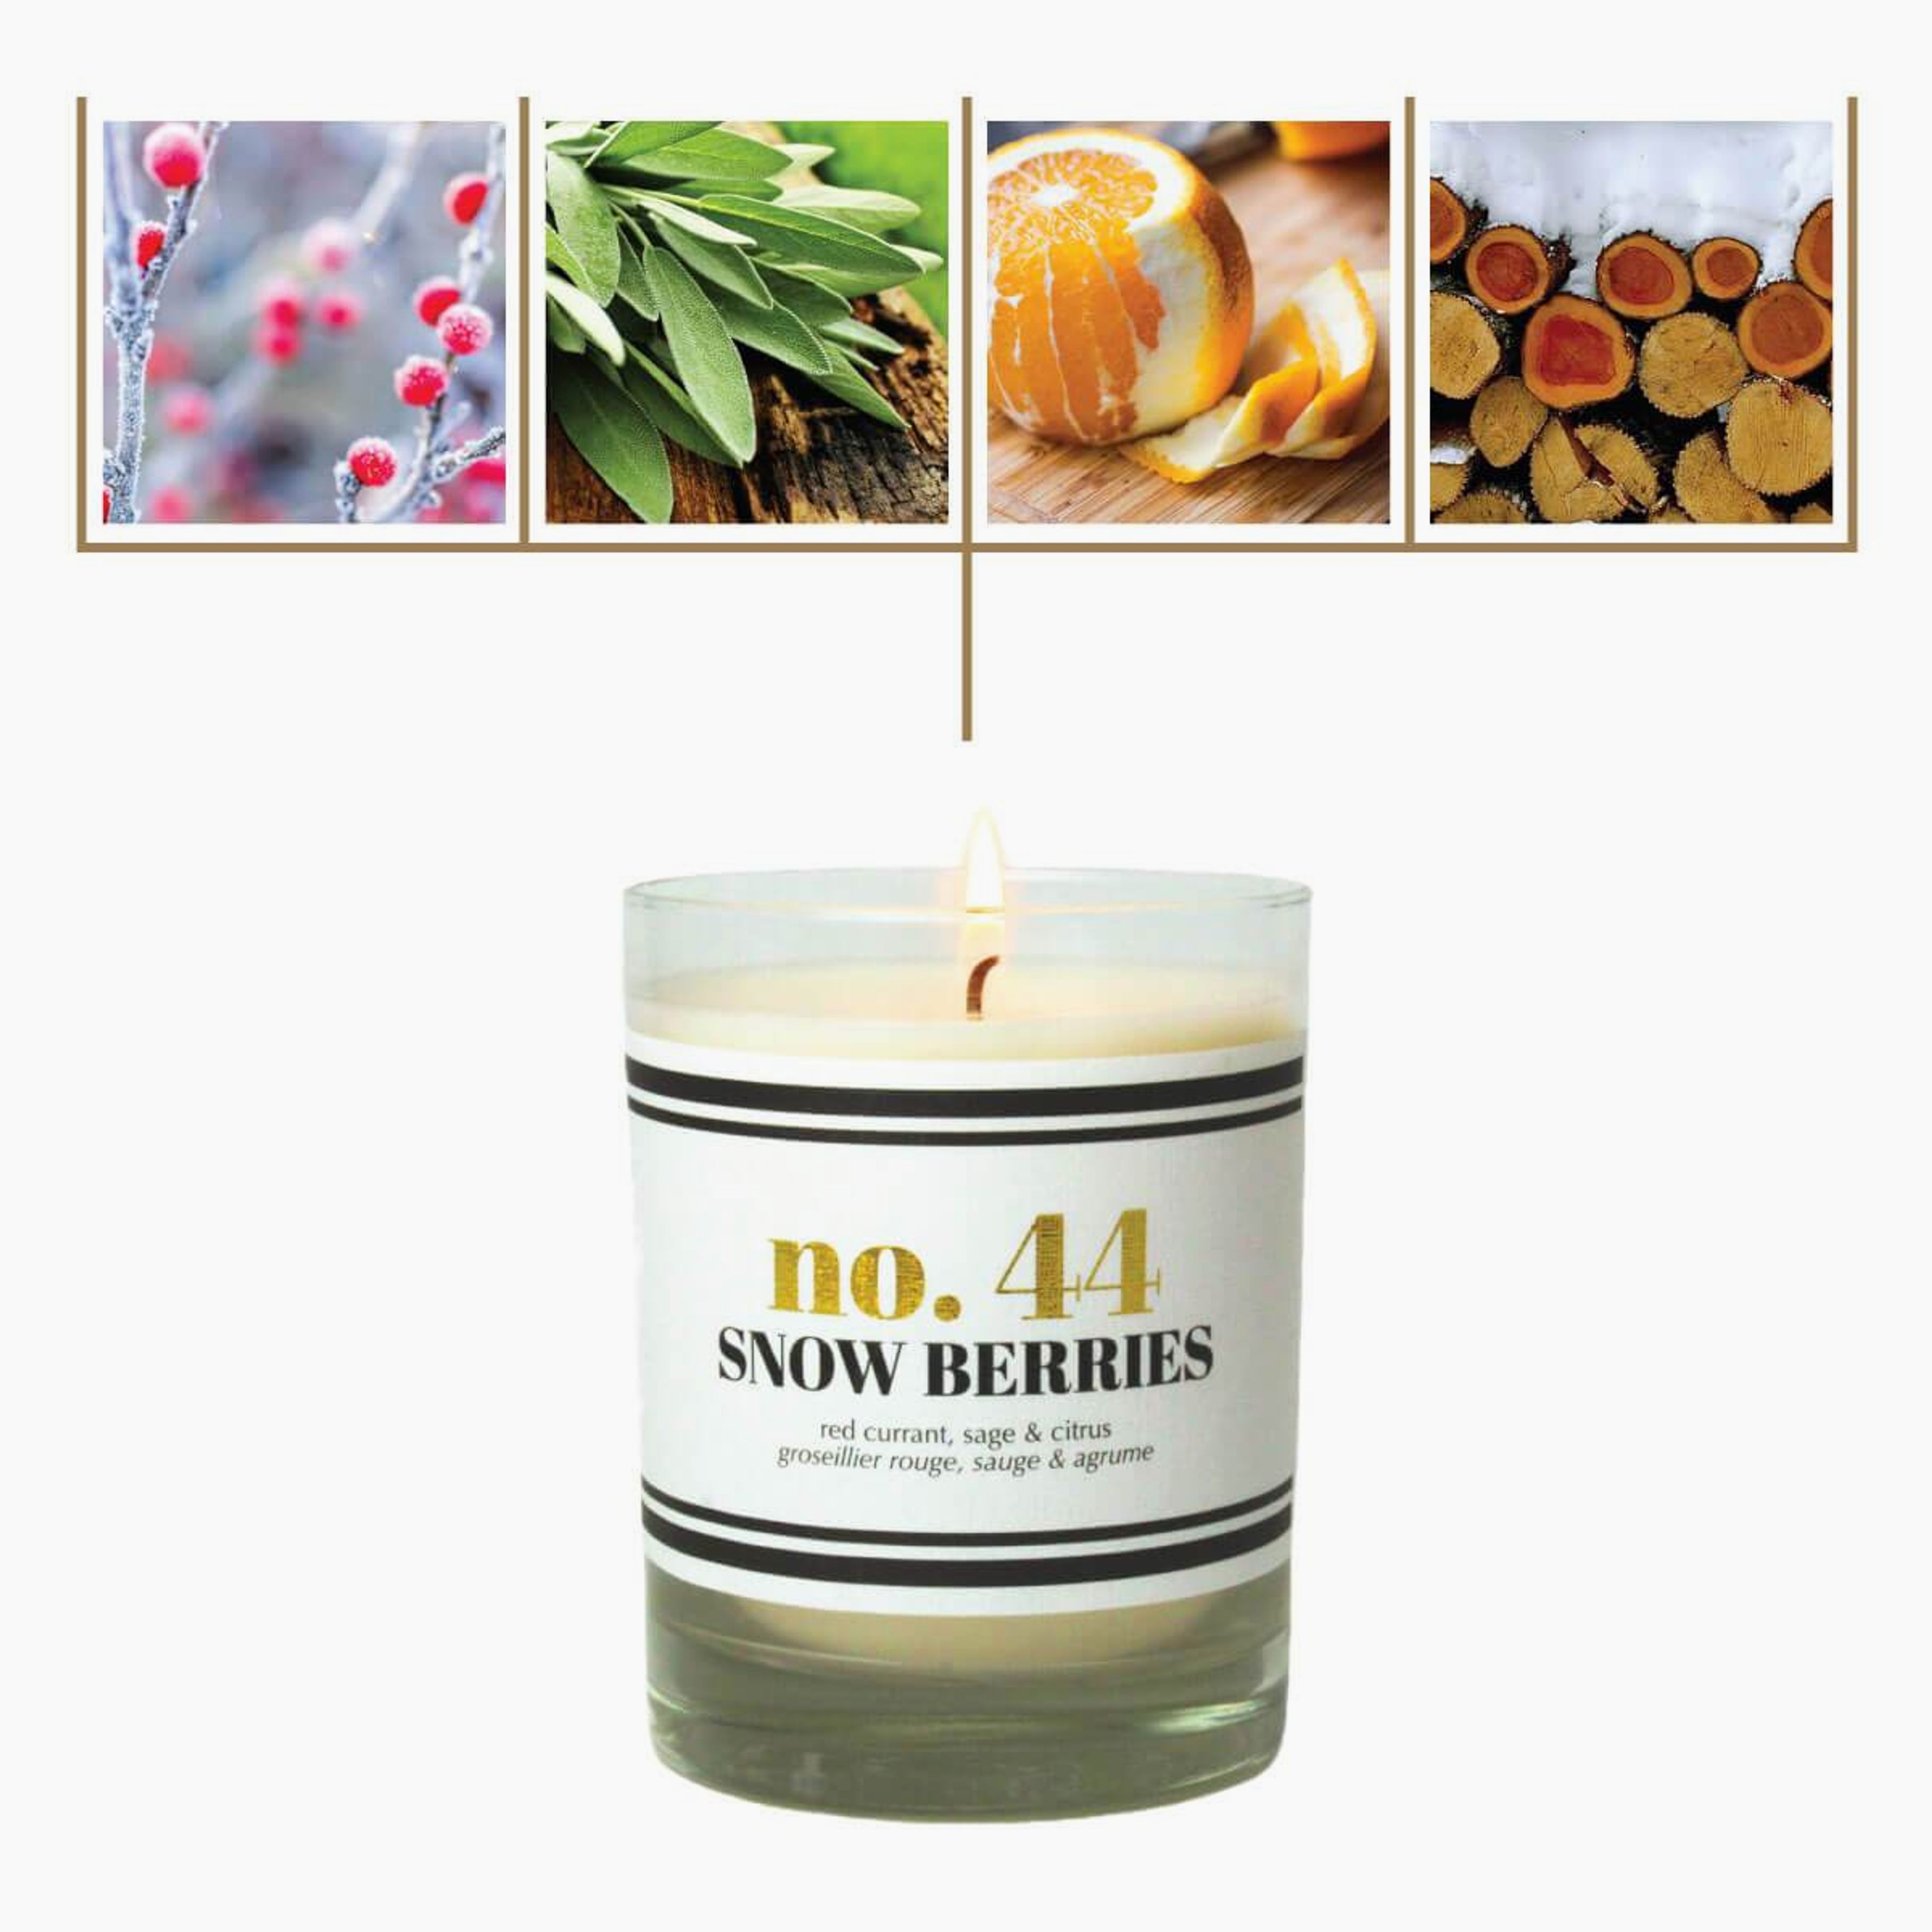 No. 44 Snow Berries Scented Soy Candle